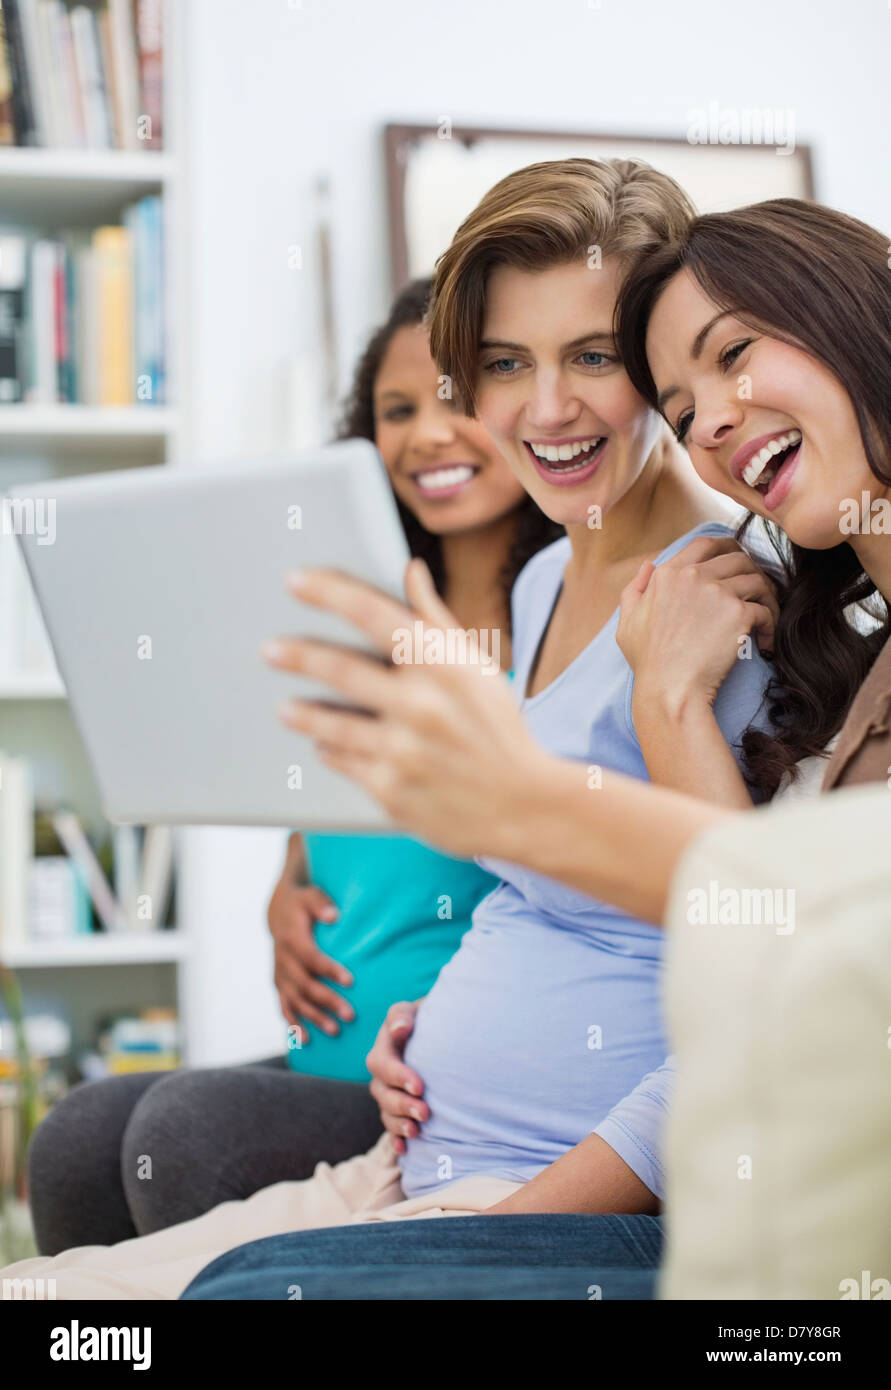 Women using tablet computer together Stock Photo